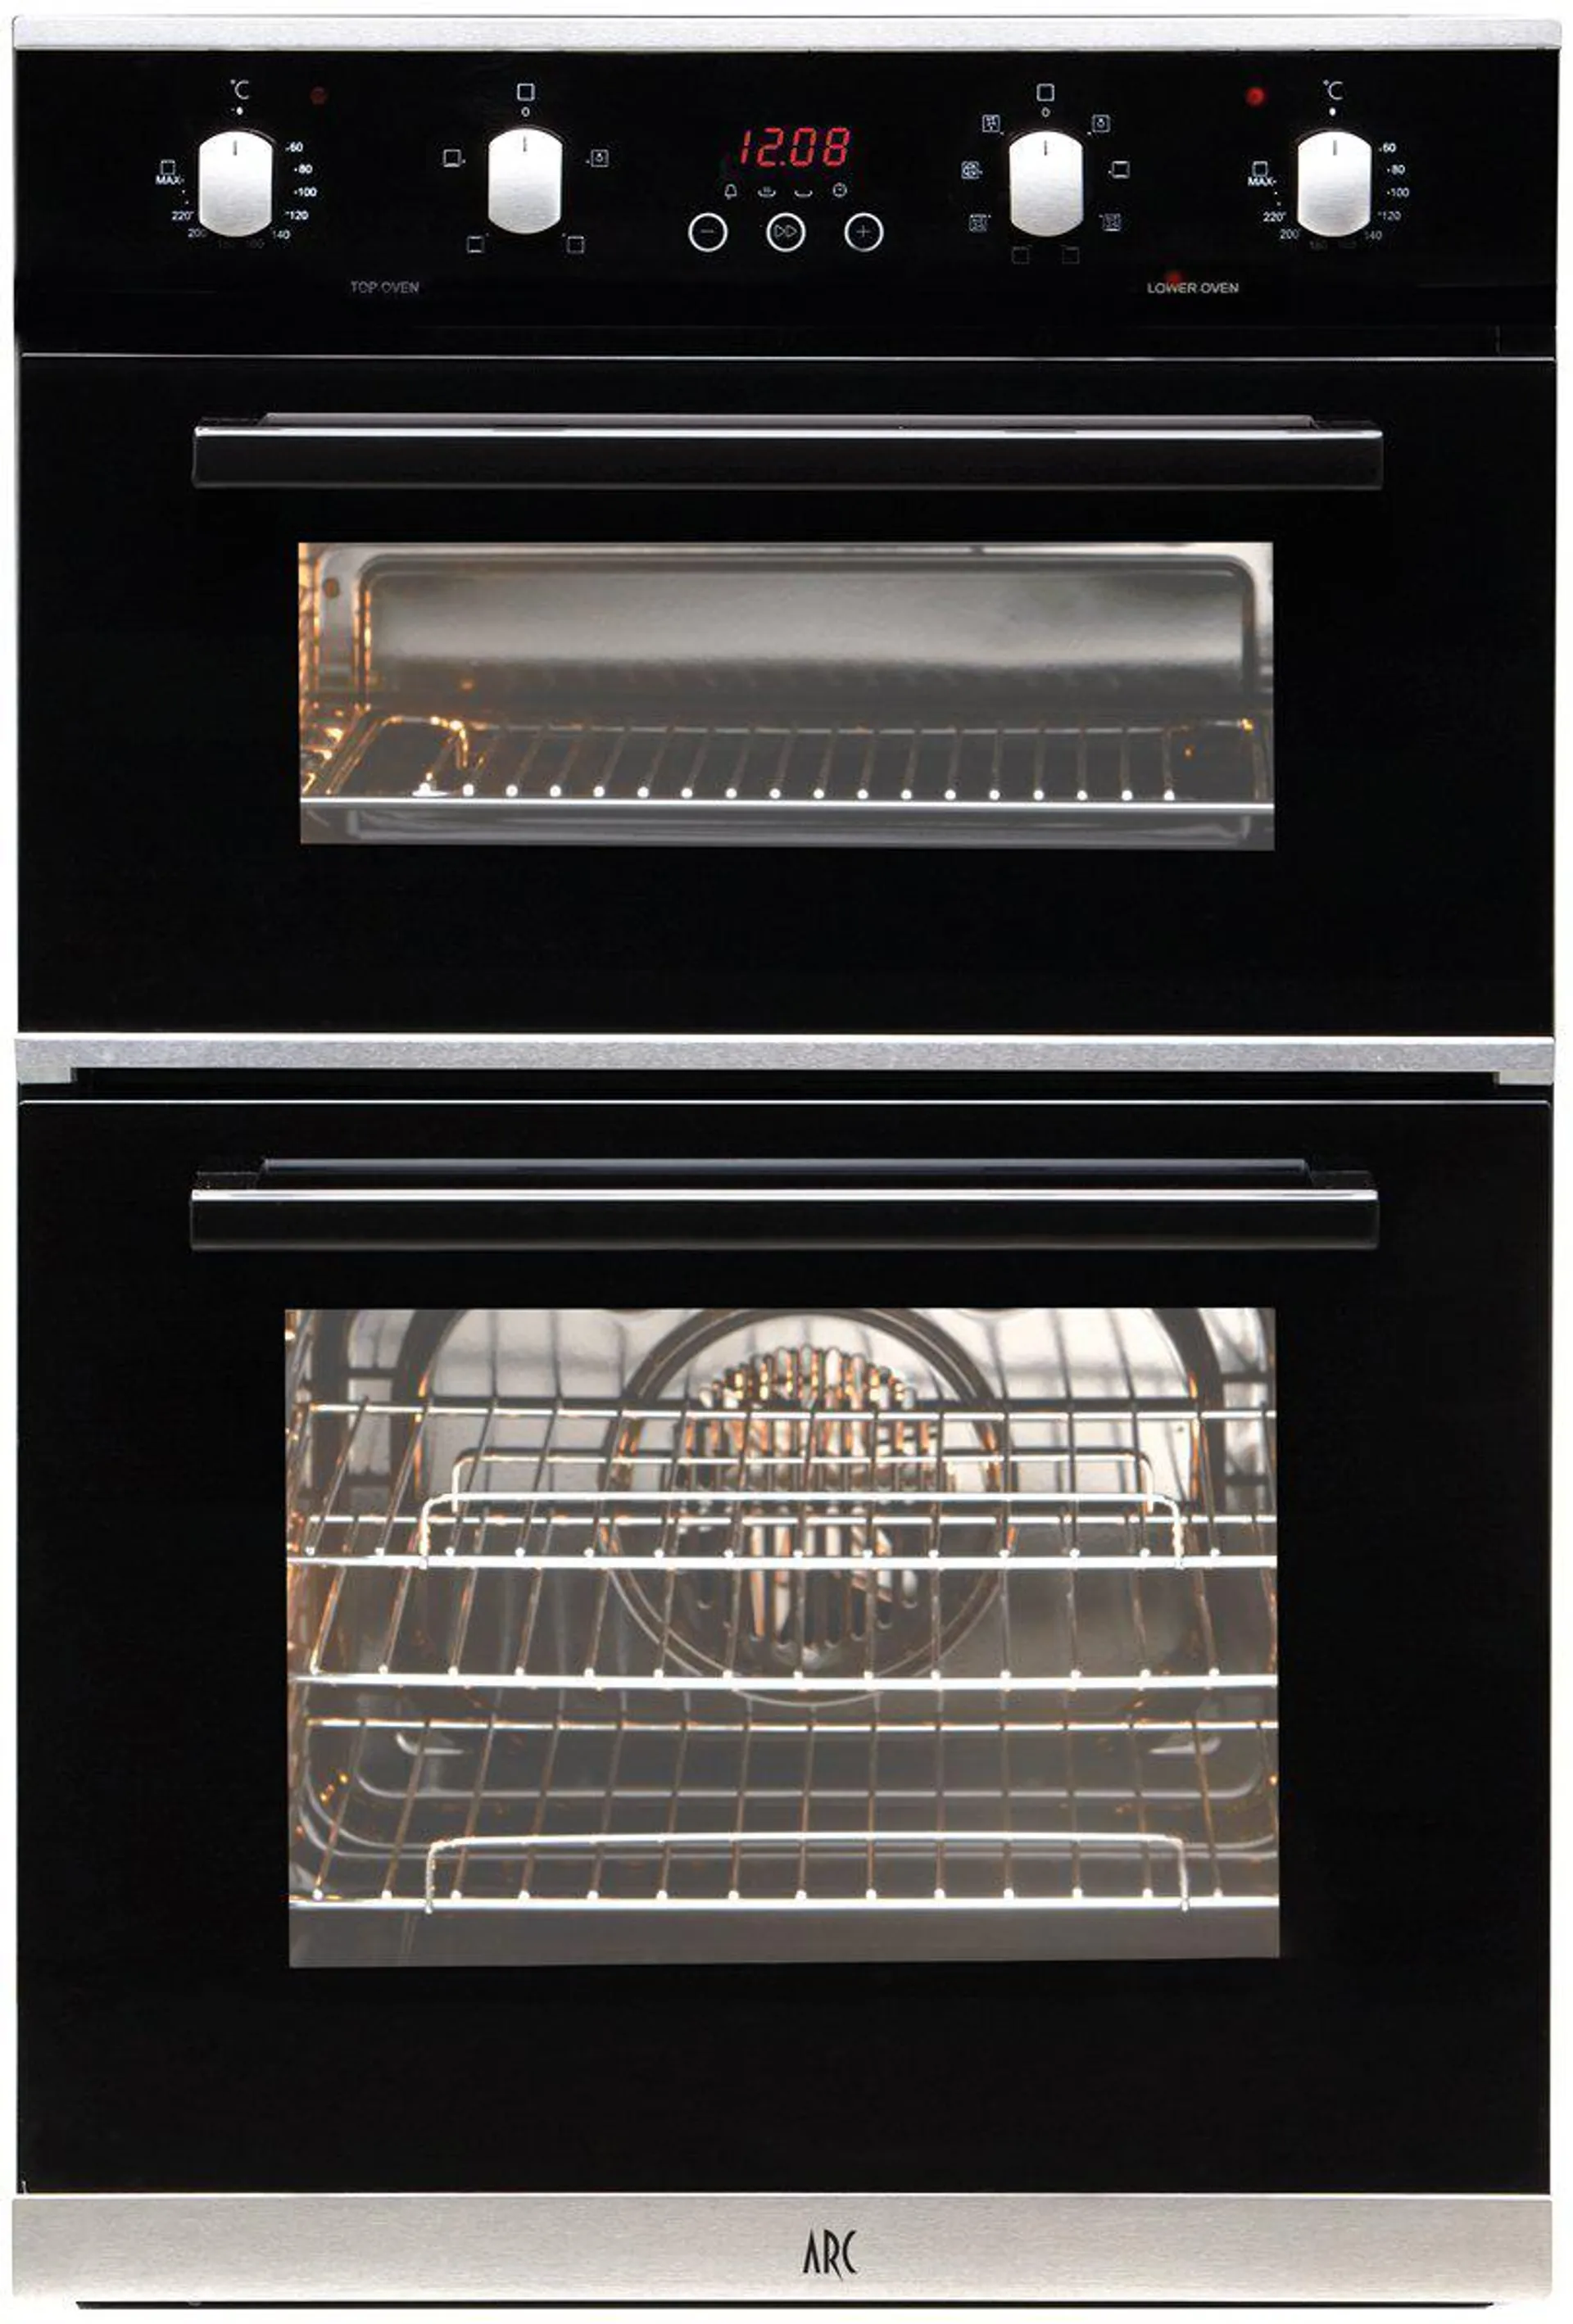 Arc AR2S 60cm Electric Built-In Double Oven